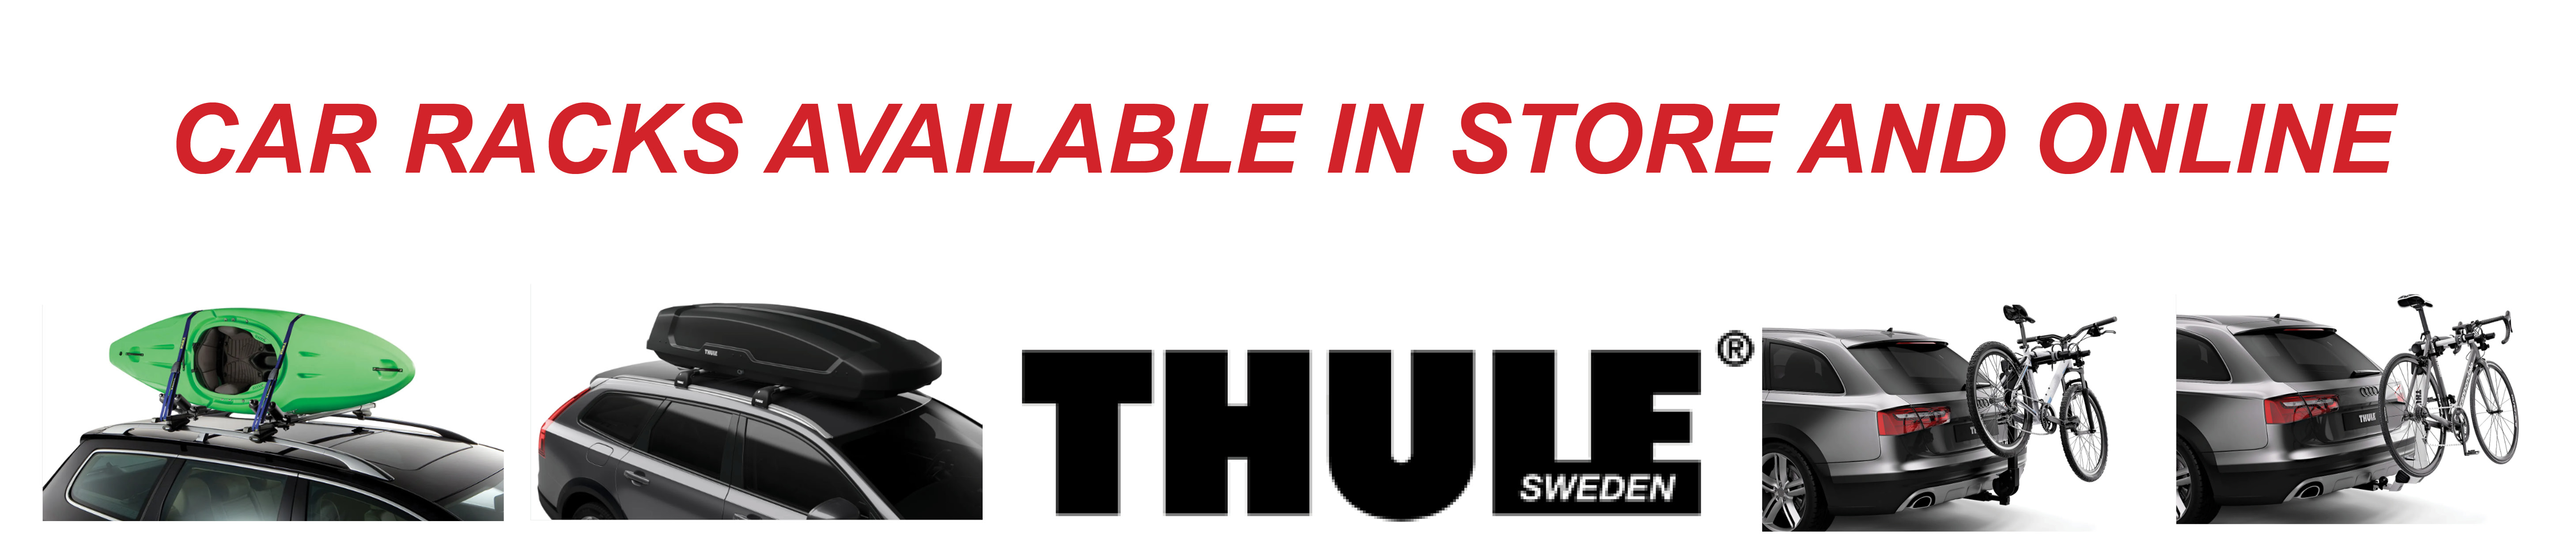 Thule car racks available in store and online